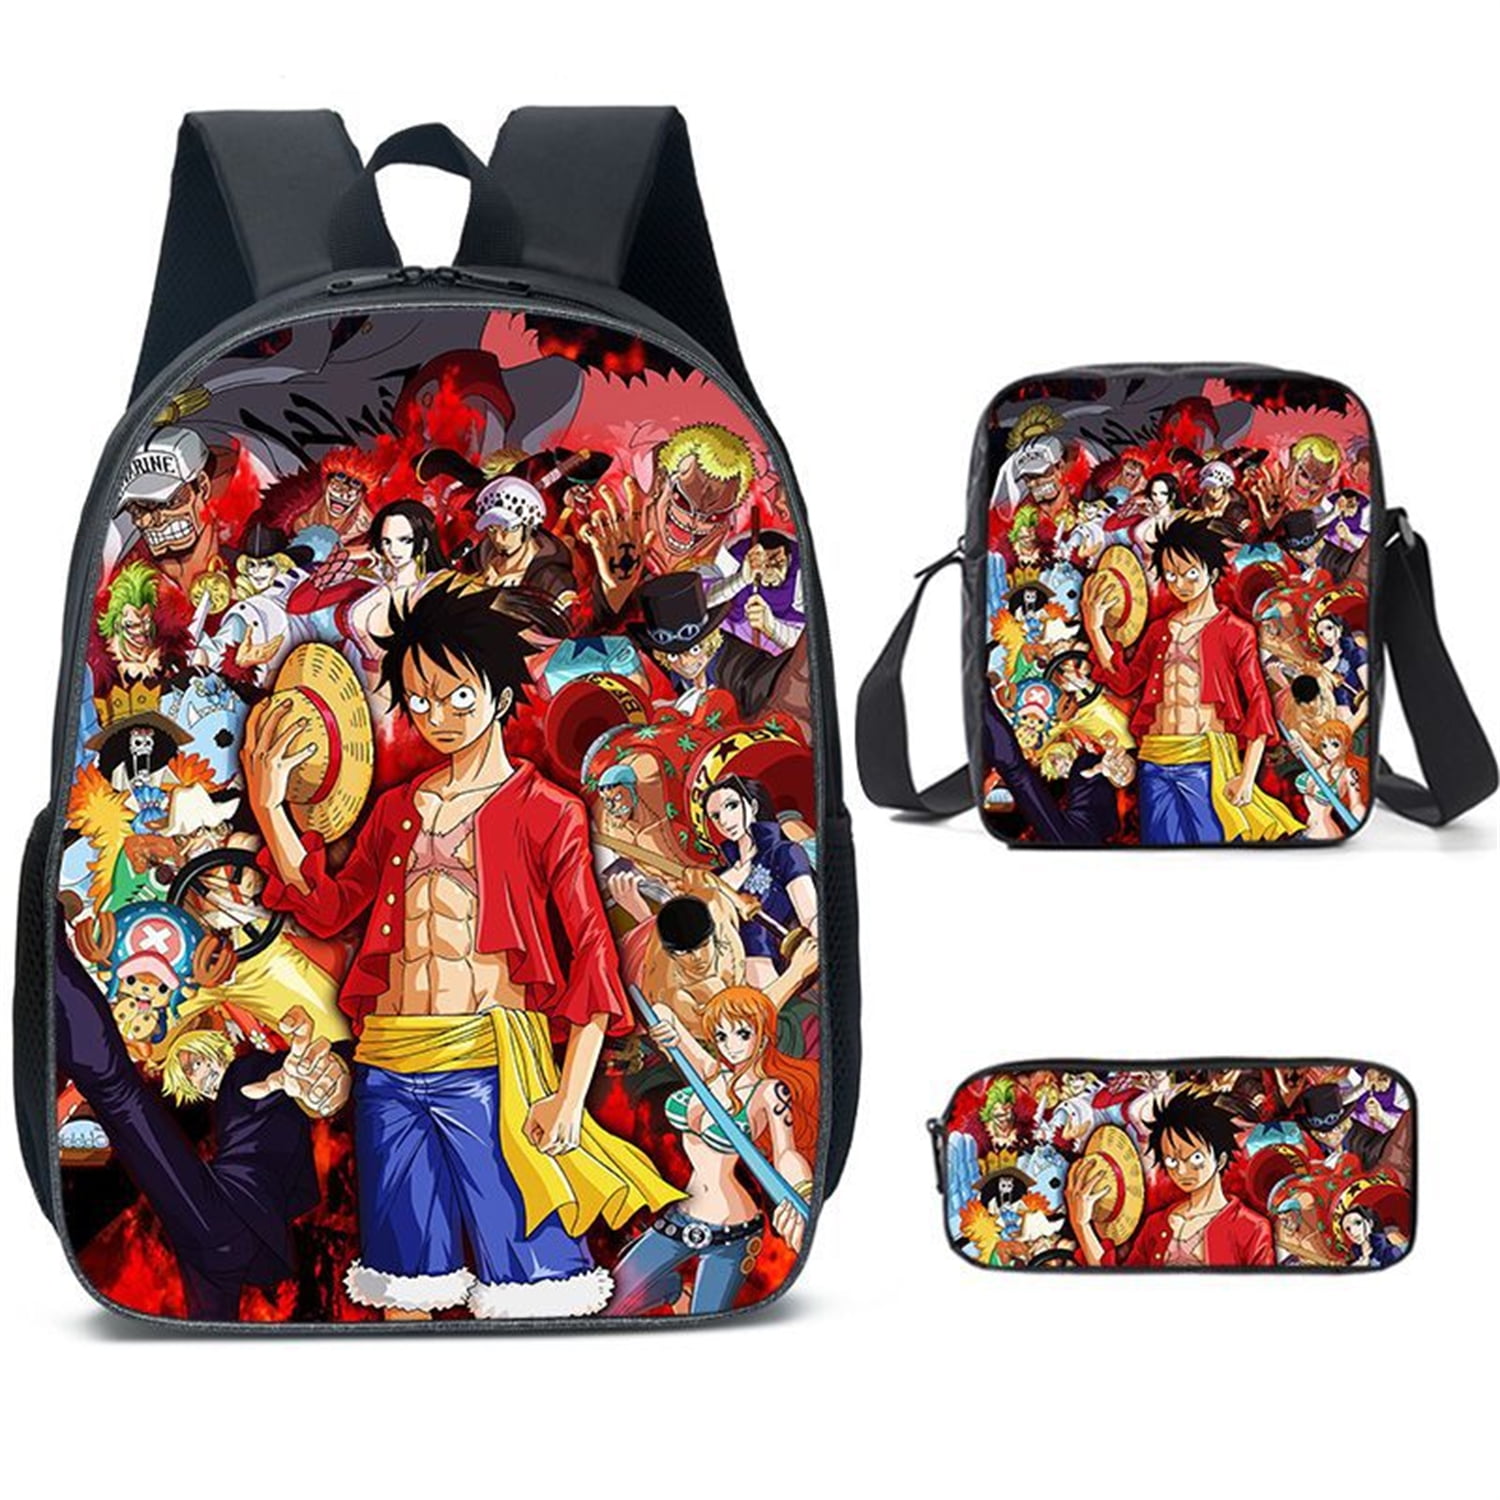 Naruto School Bag Custom Naruto Shippuden Anime Backpack  The Perfect  Gifts For Fans  Backpacks Bags School bags